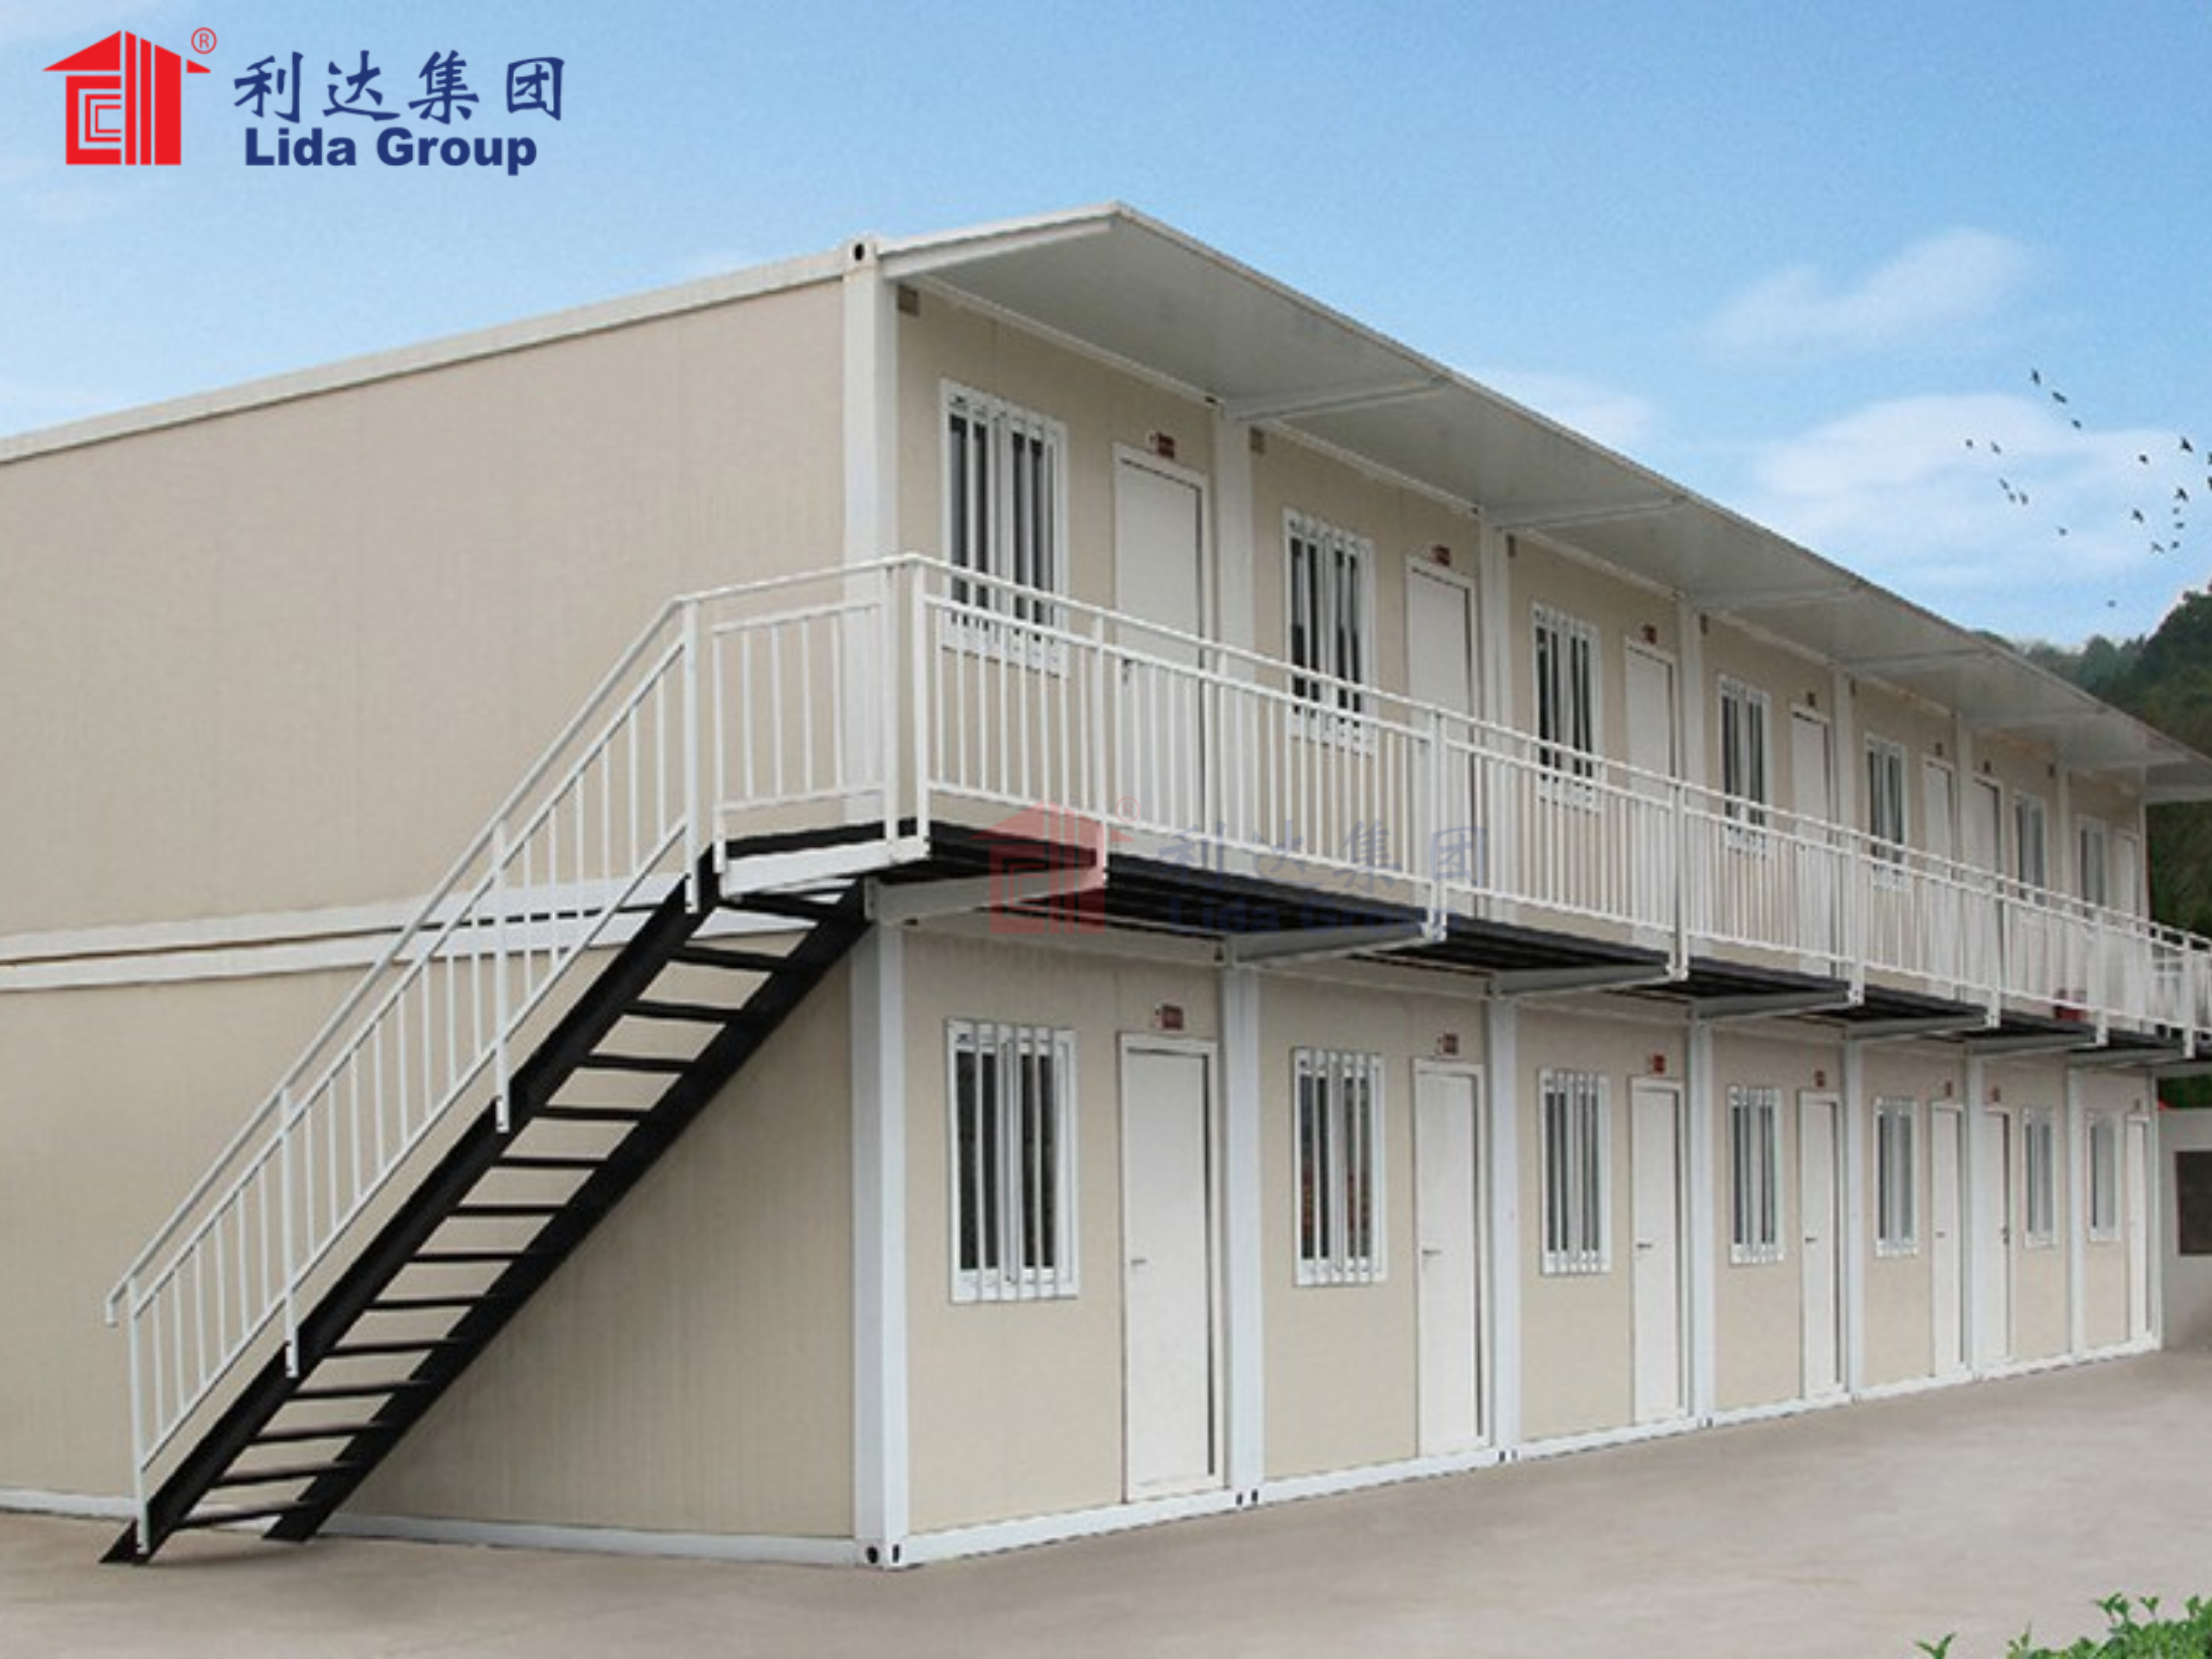 Donors pledge funds to scale Lida Group's standardized modular construction model delivering prefabricated container housing incorporating livelihood programming for thriving self-sufficient village beyond shuttered labor camp site